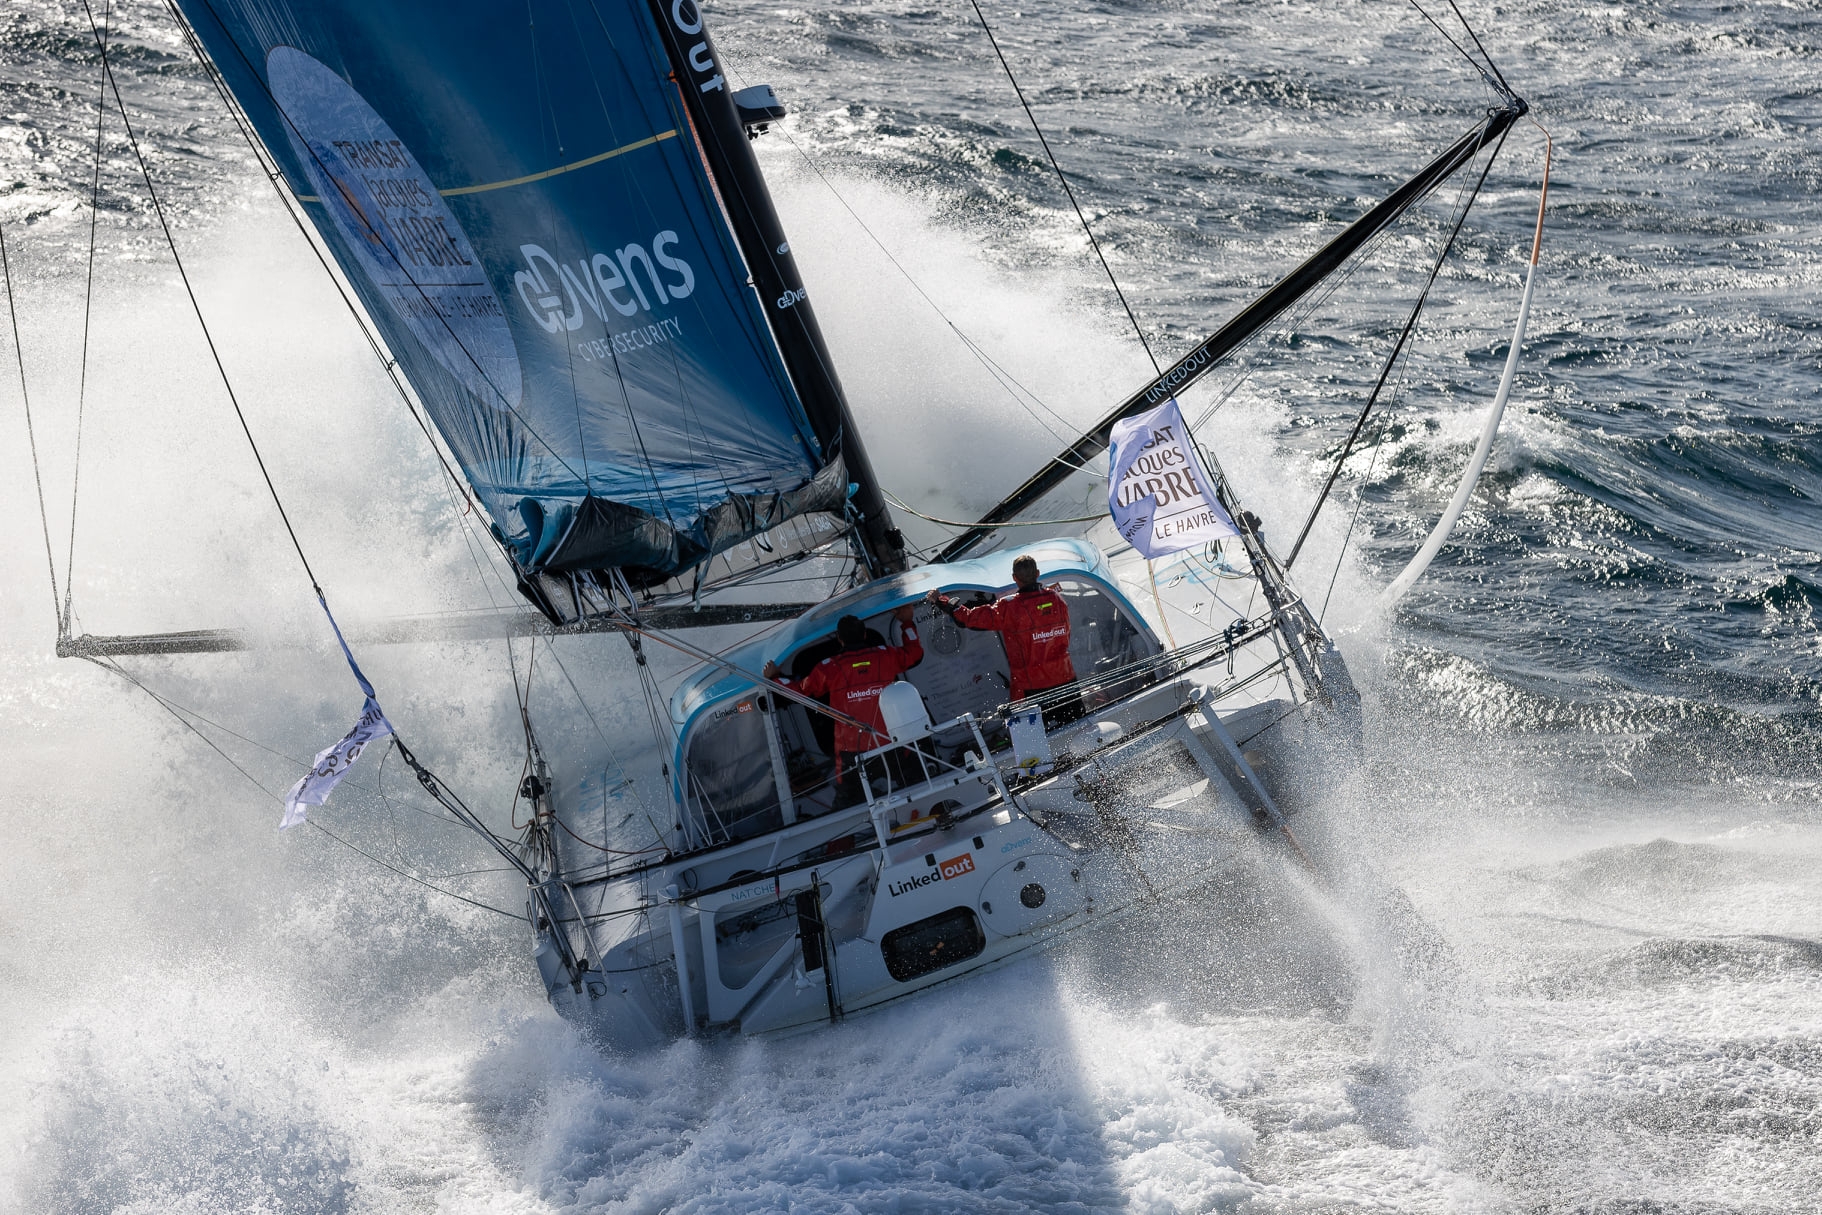  IMOCA Open 60, Class 40, Ultime, Ocean50  Transat Jacques Vabre  Day 6